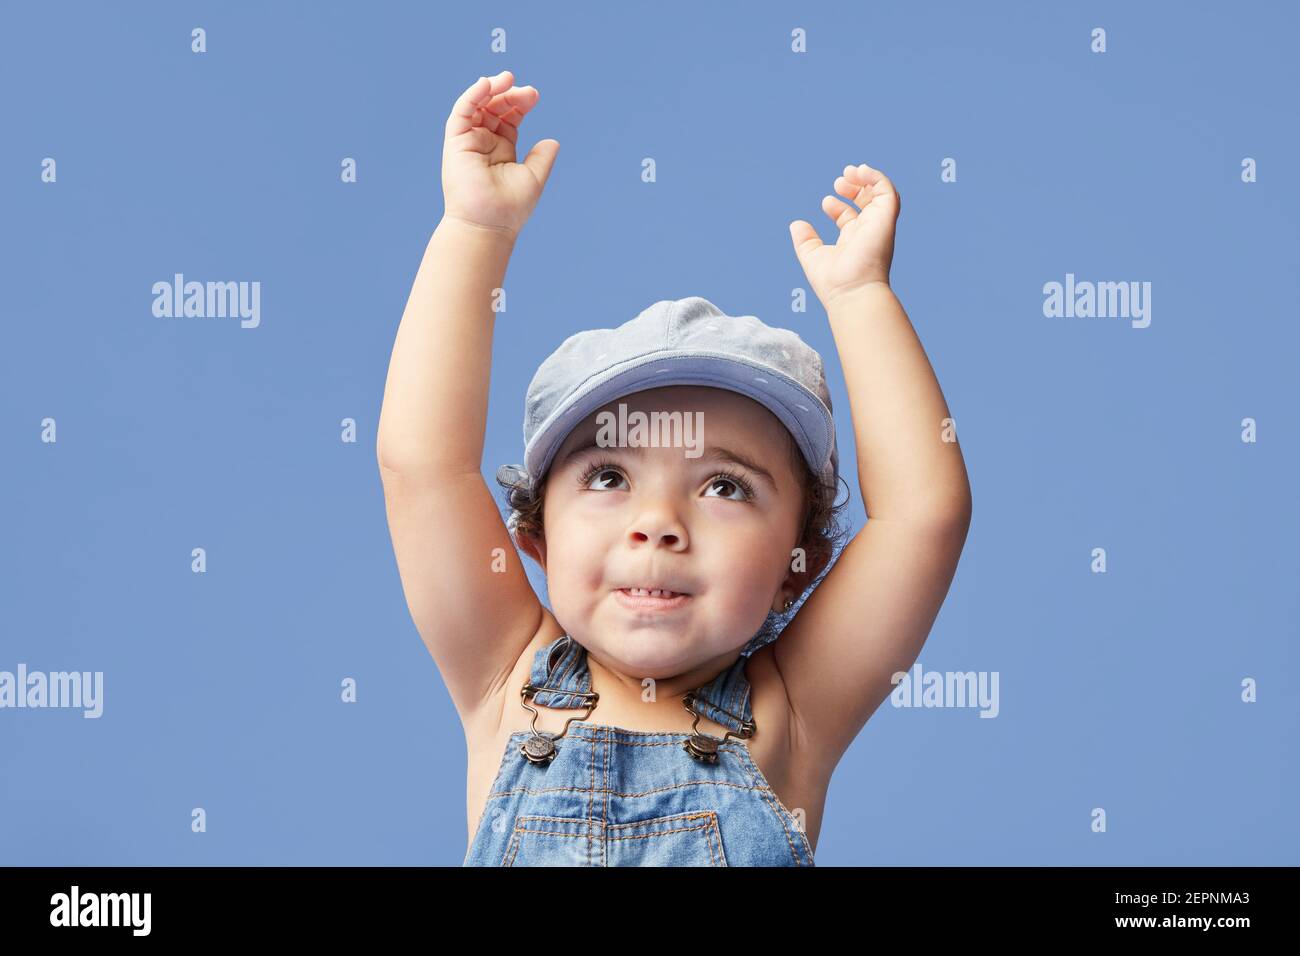 Charming barefoot child in denim dress and dress with curly hair looking up with arms raised while dancing on blue background Stock Photo